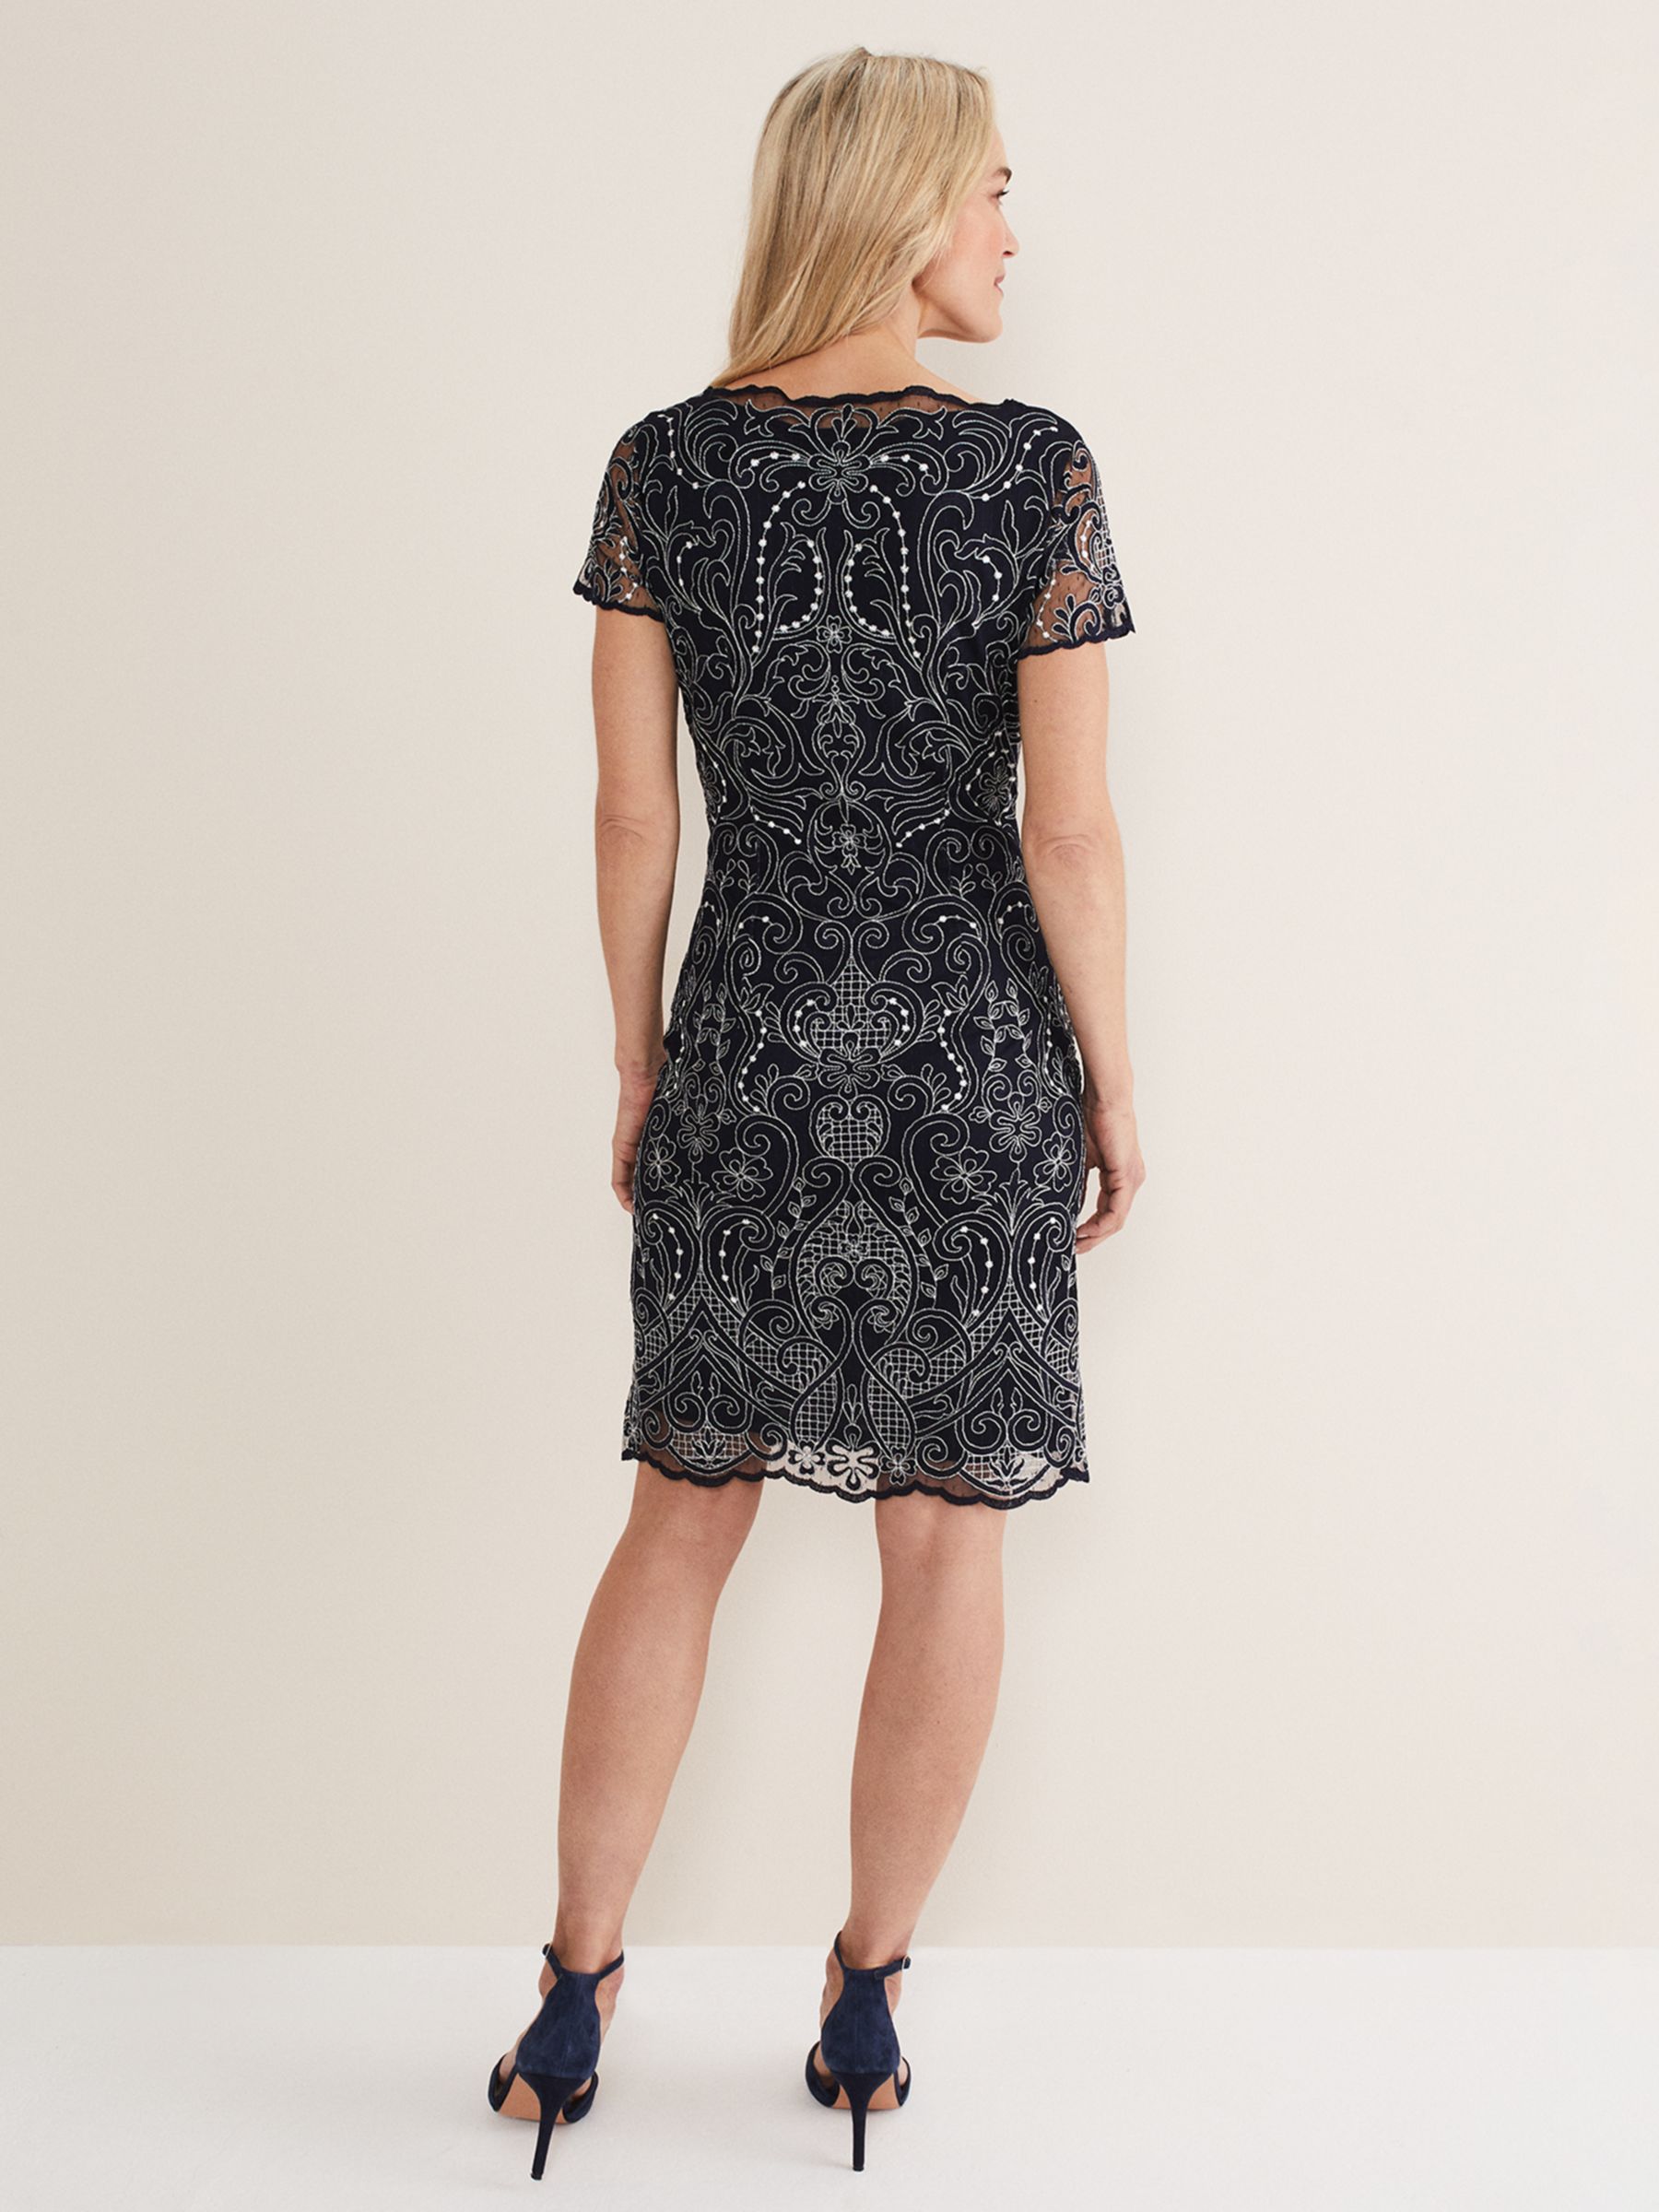 Phase Eight Esme Embroidered Dress, Navy/Ivory, 6